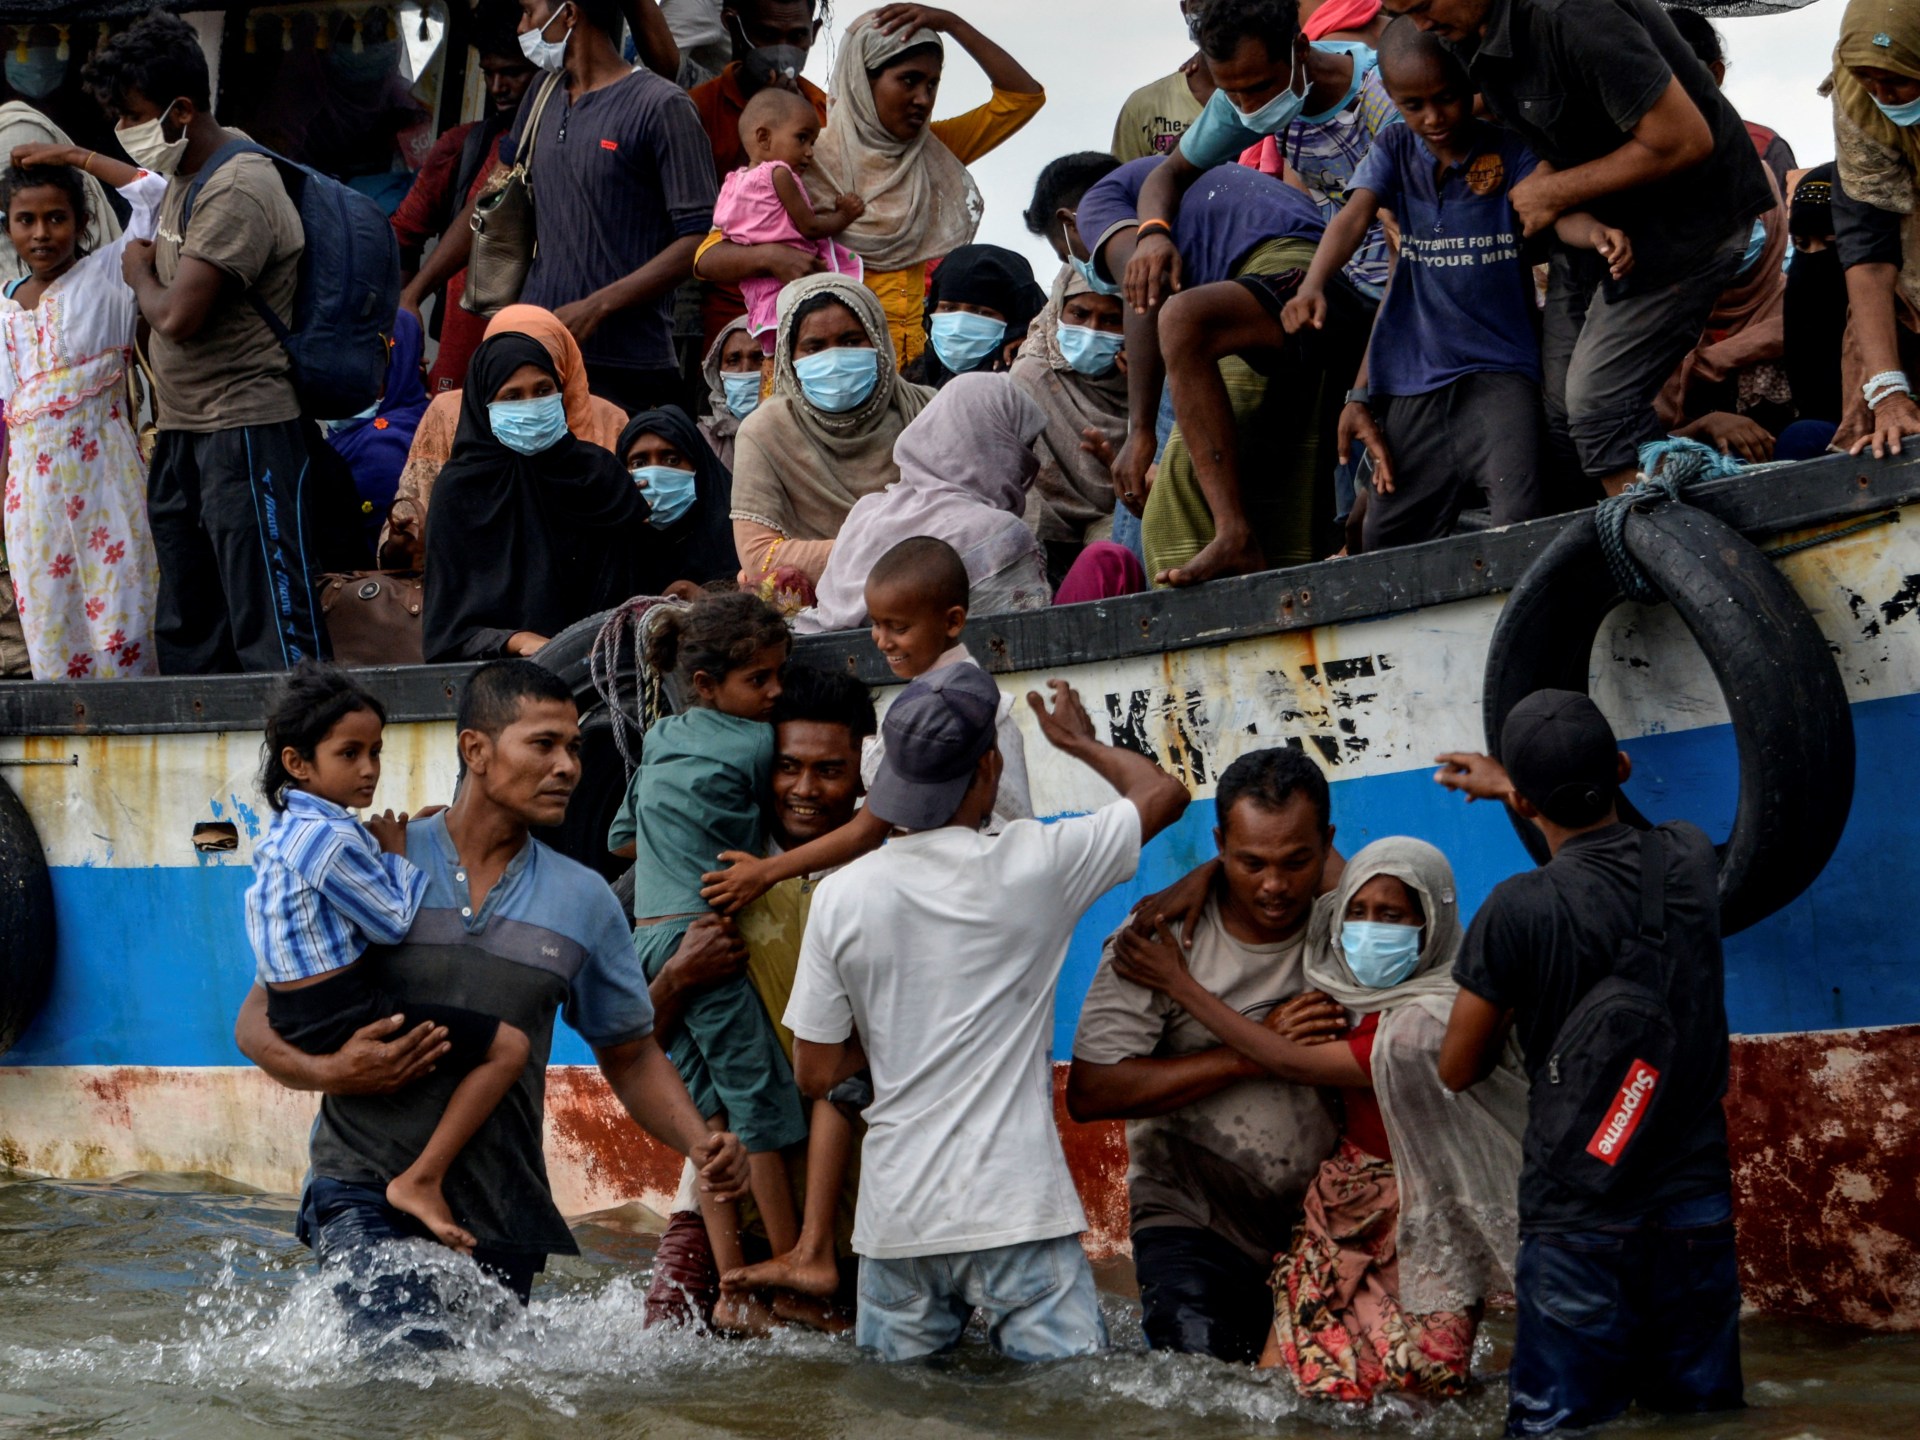 ‘We’re dying here’: Rohingya refugees on boat adrift for weeks